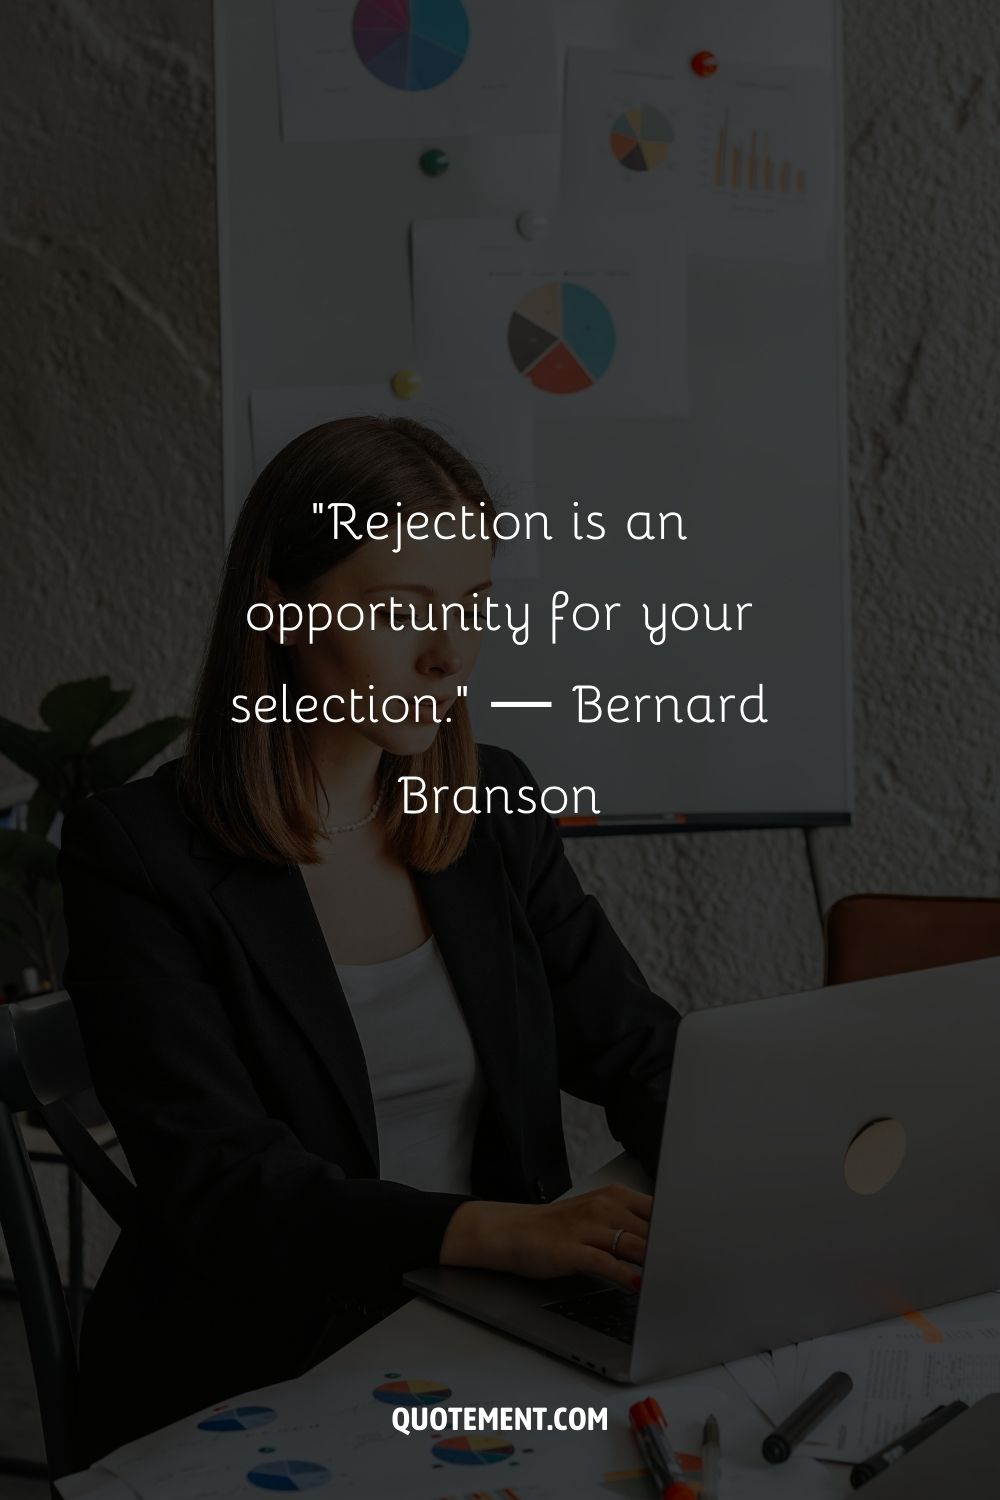 “Rejection is an opportunity for your selection.” ― Bernard Branson